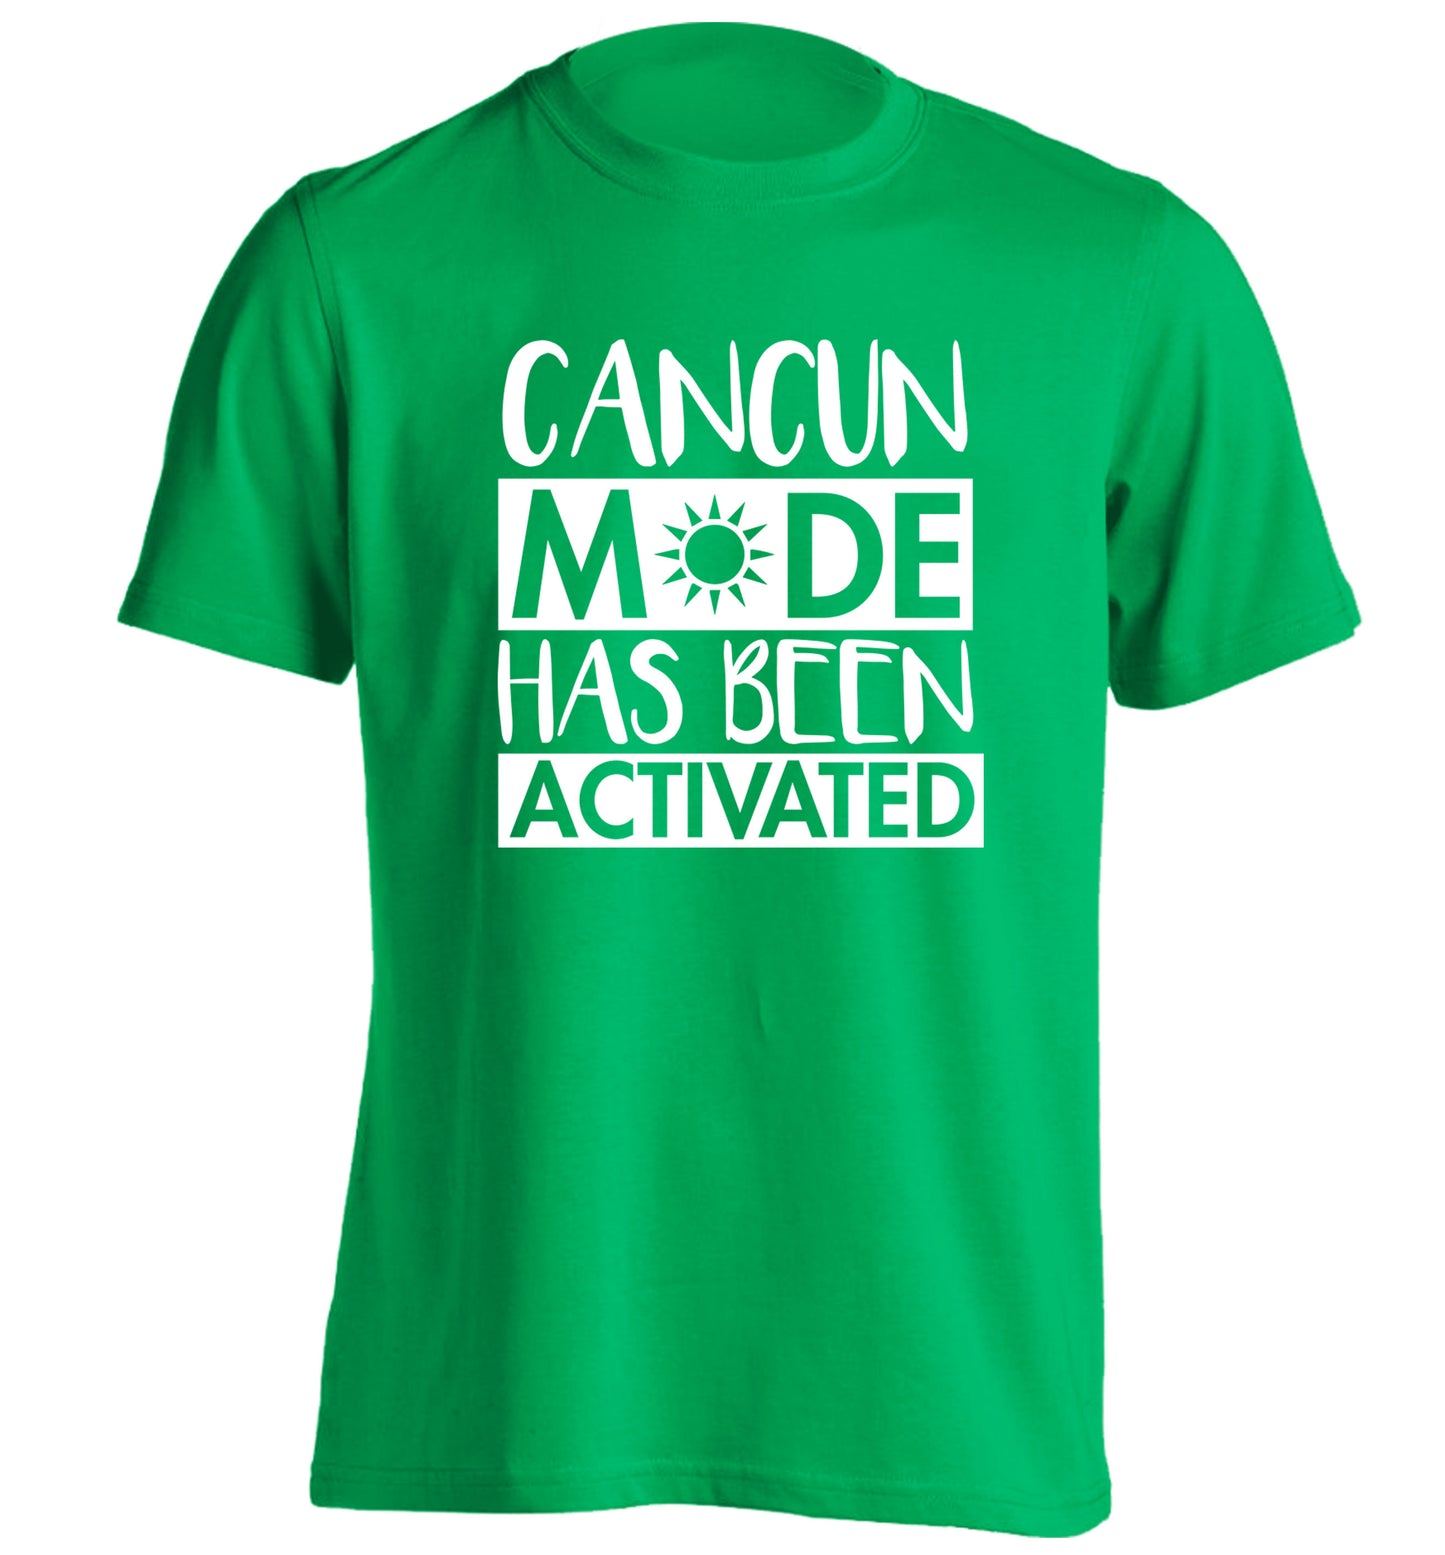 Cancun mode has been activated adults unisex green Tshirt 2XL